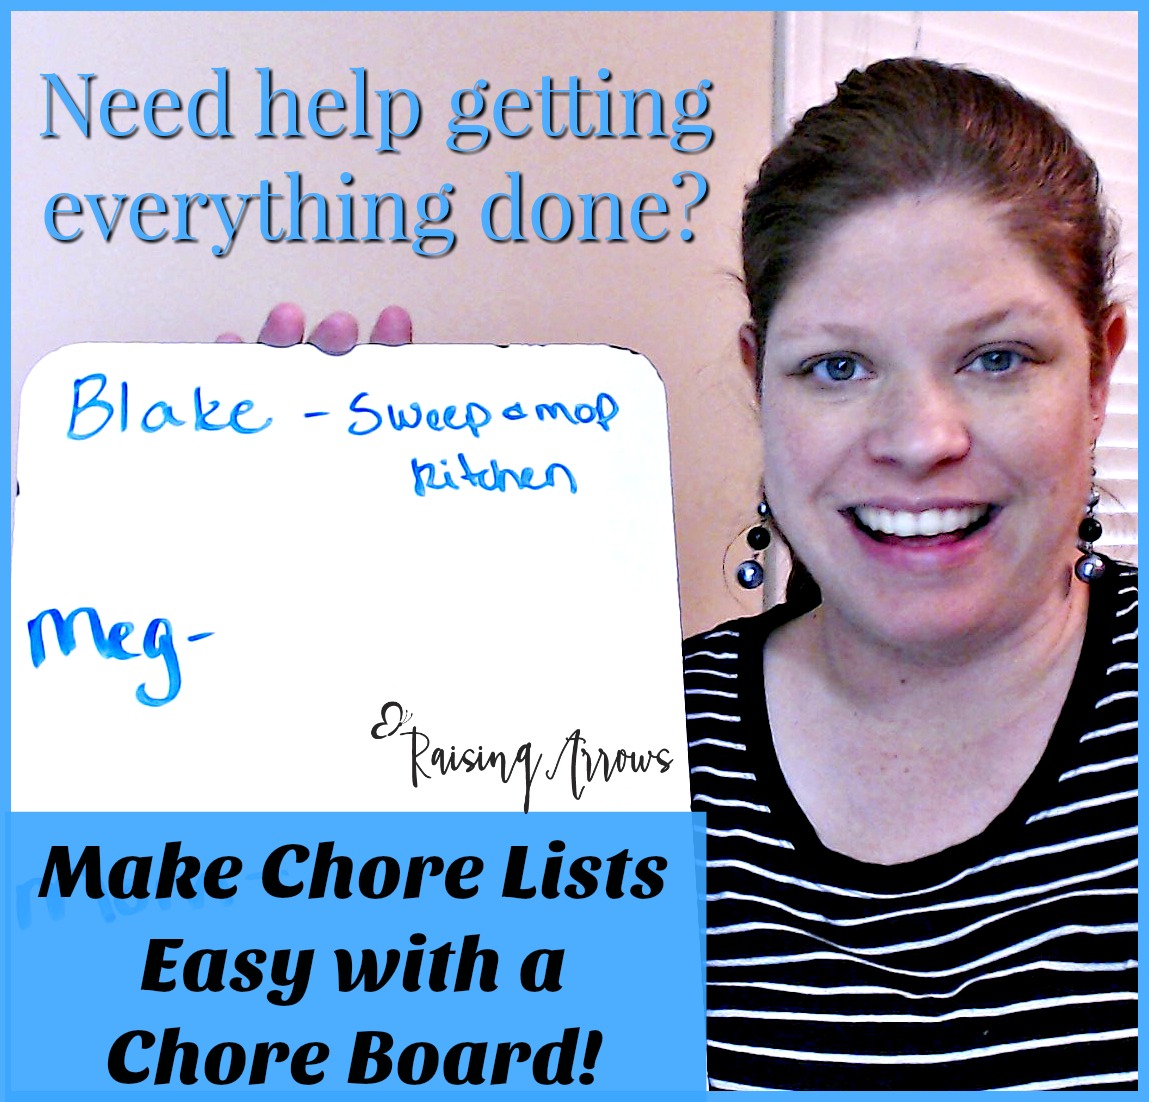 How to Make Chores Easy with a Chore Board! Works great for families with only small children, homeschooling families, large families, or busy moms for whatever reason!